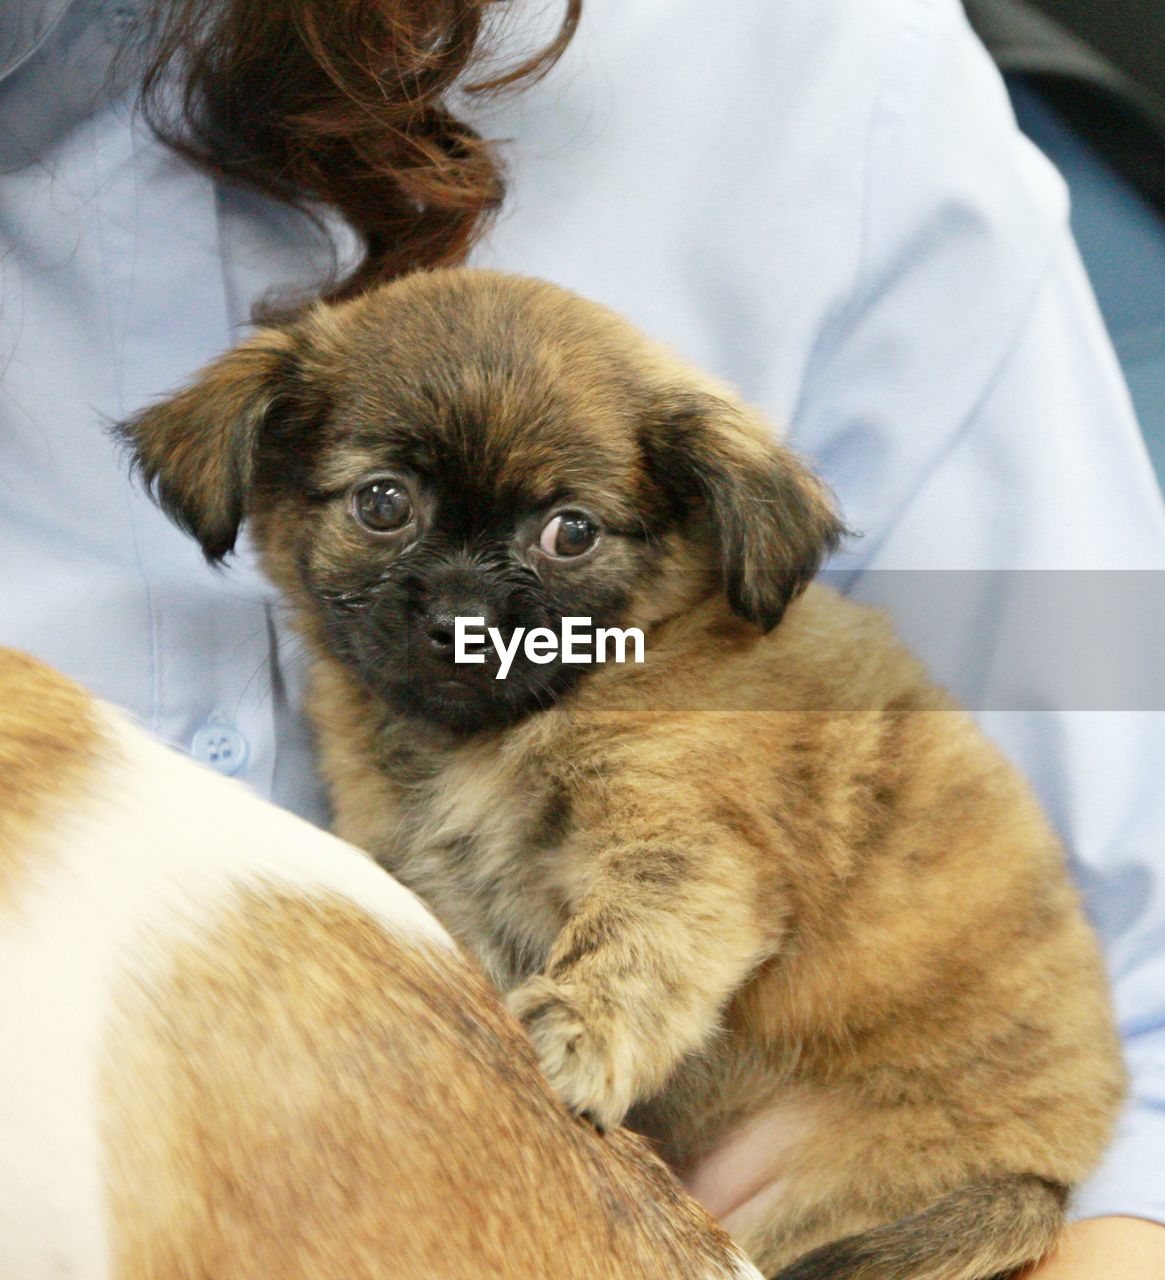 mammal, canine, dog, pet, animal themes, domestic animals, animal, one animal, lap dog, young animal, puppy, cute, healthcare and medicine, hospital, care, indoors, veterinarian, child, portrait, brown, adult, medical exam, sitting